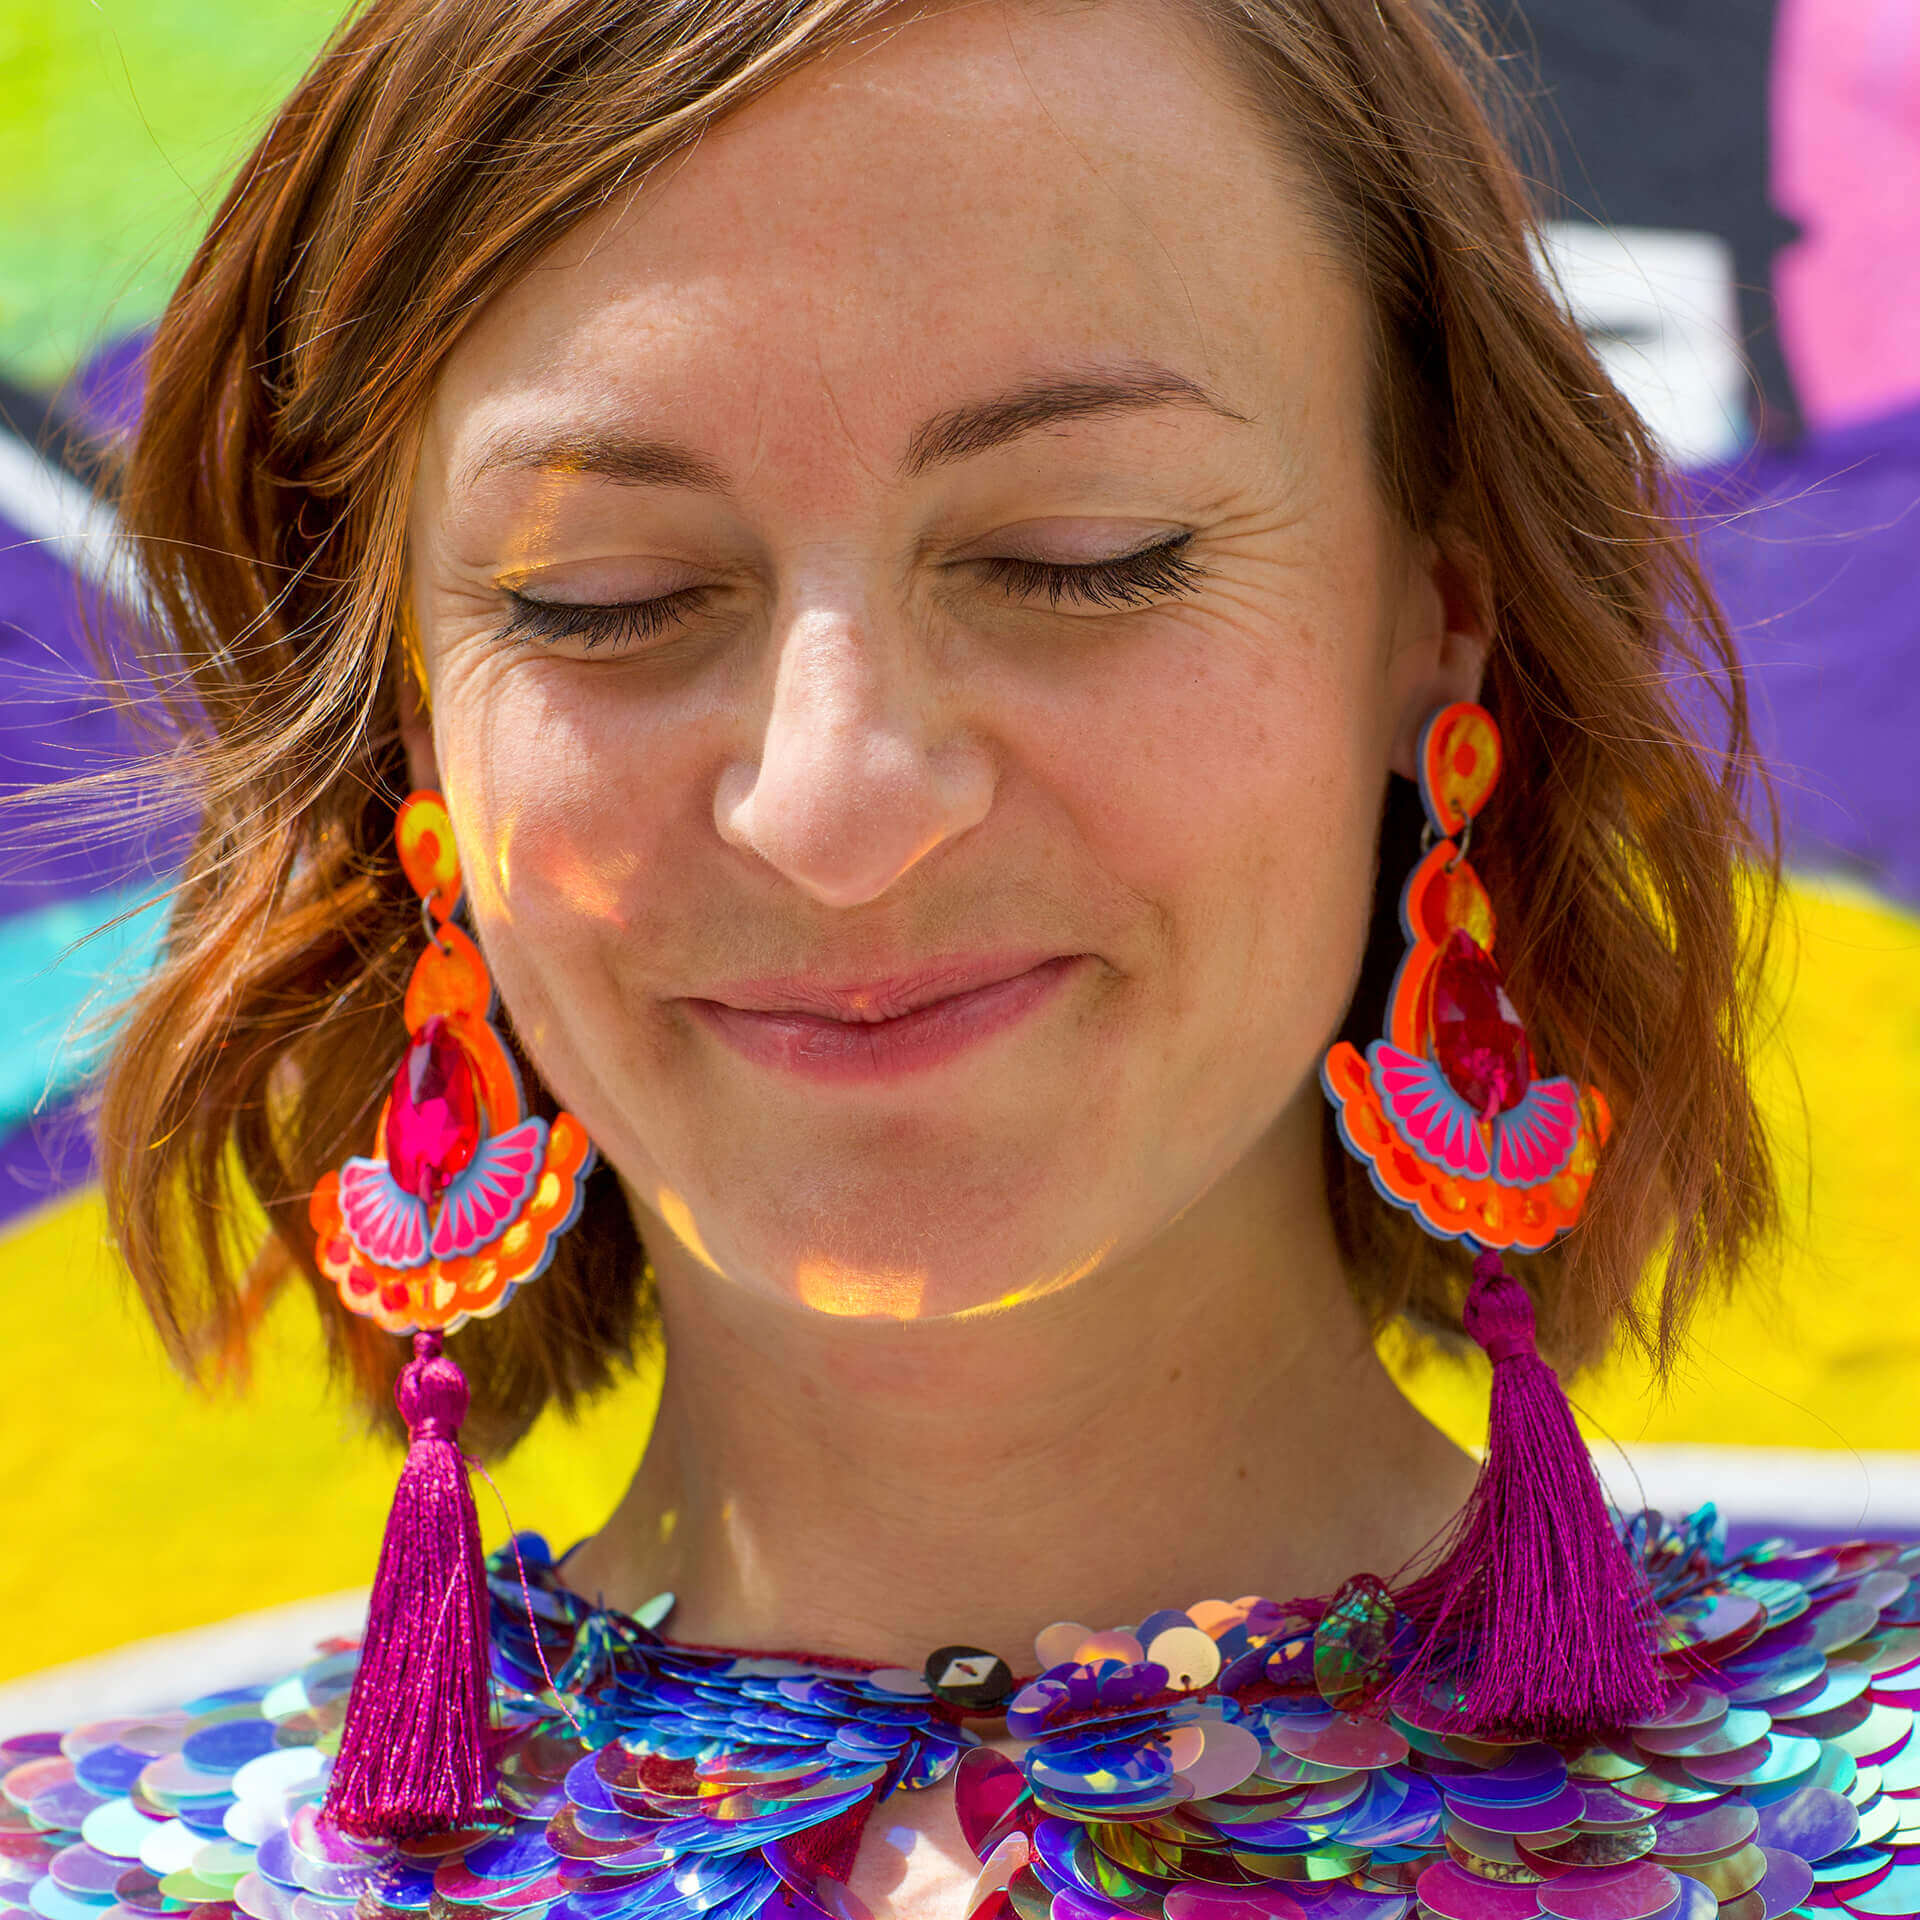 a white woman with short brown hair wearing large colourful tassel earrings is facing the camera with her eyes closed. The wall behind her is painted with bright colours and the image looks sunny and warm.